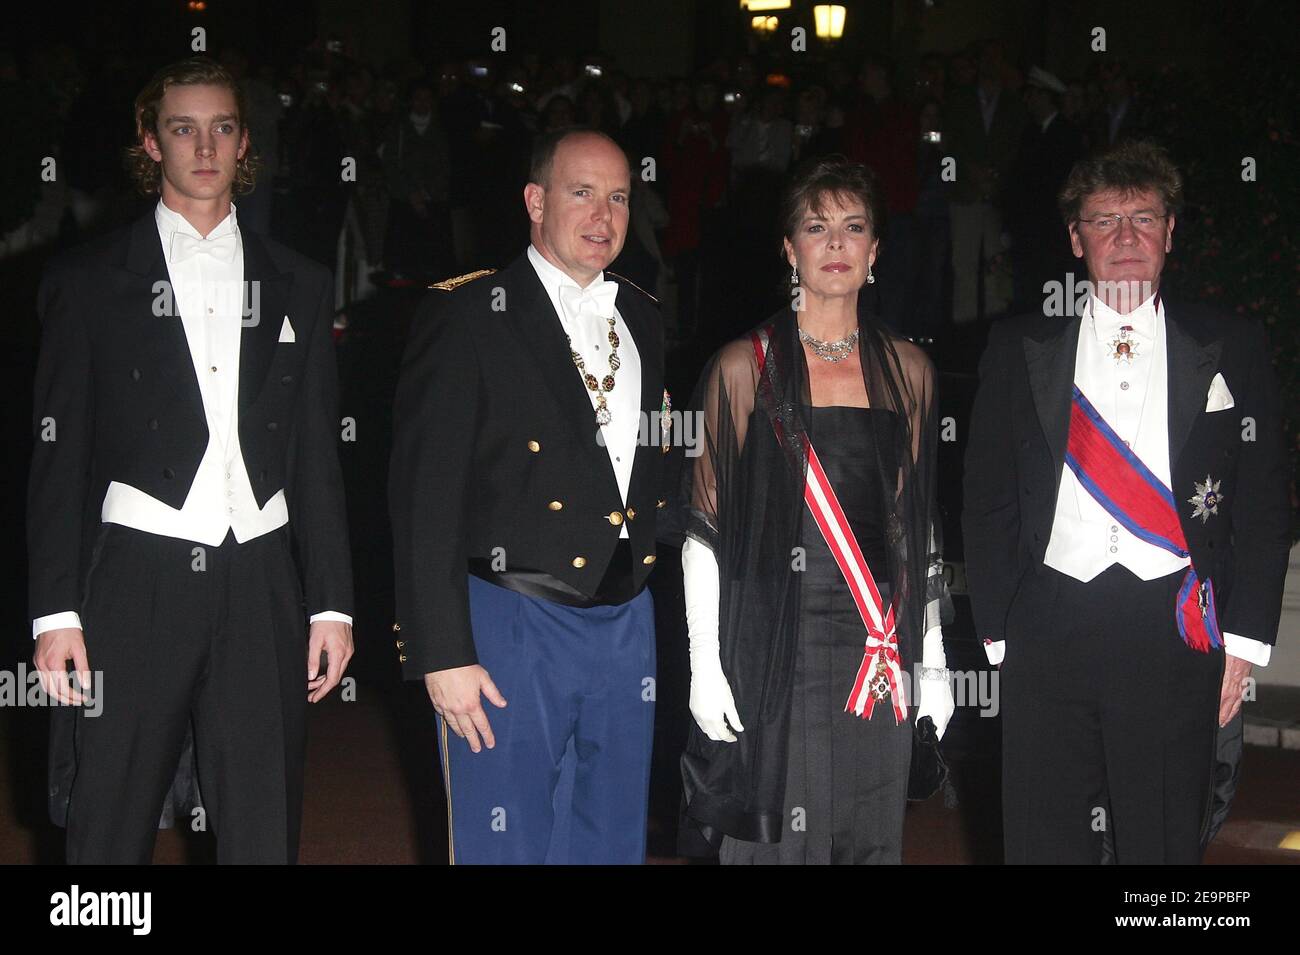 Pierre Casiraghi, Prince Albert II of Monaco, Princess Caroline of Hanover and Prince Ernst of Hanover attend the Gala event at the Salle Garnier in Monaco as part of Monaco's National Day celebrations on November 19, 2006. Photo by Nebinger-Orban/ABACAPRESS.COM Stock Photo